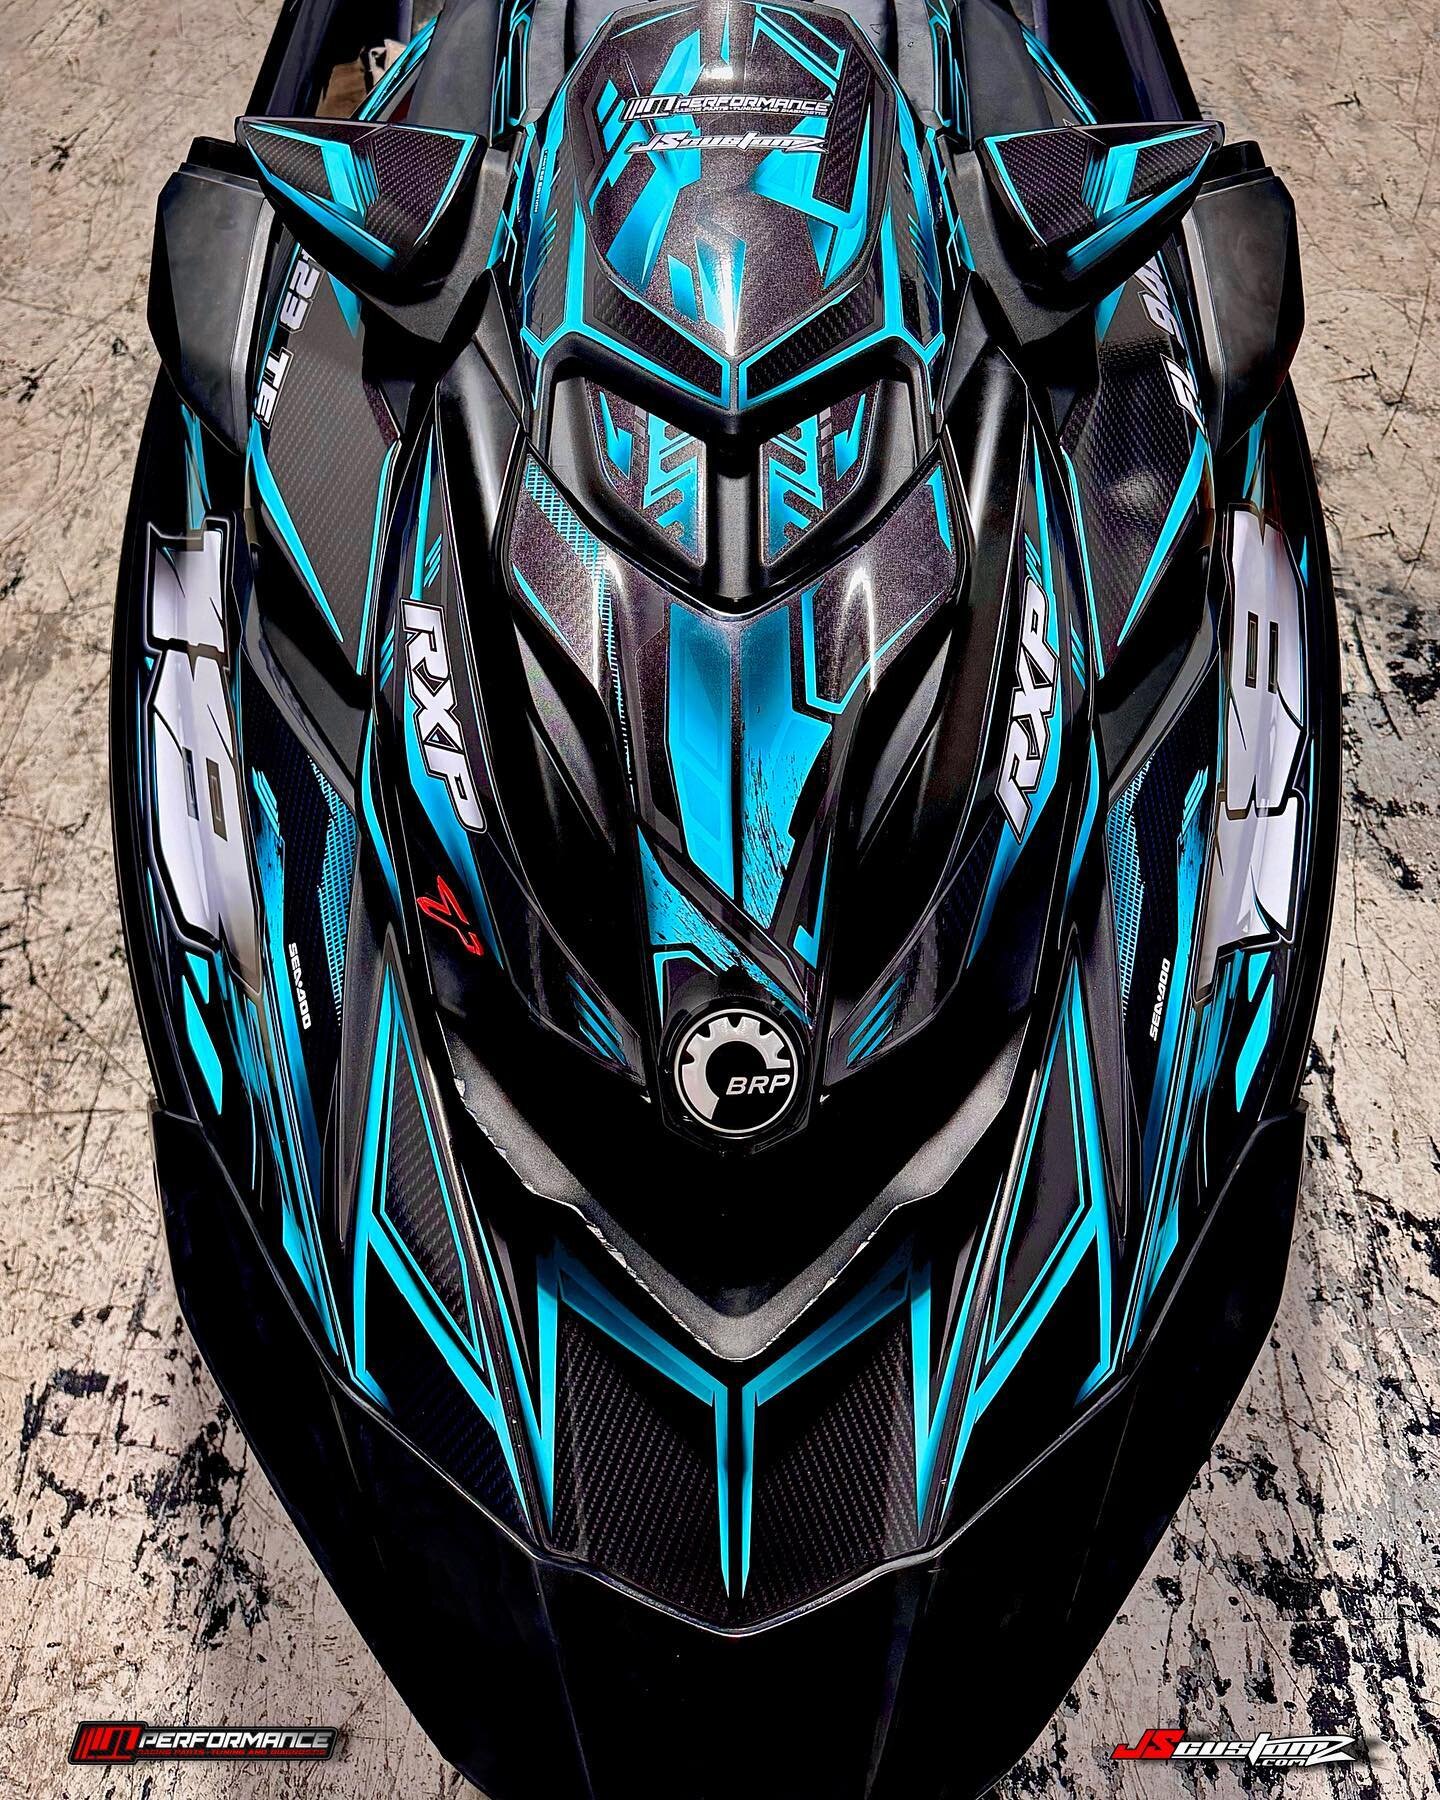 ▪️Because Uniqueness Is The Only Way We Know▪️ 
@jlperformanceusa

▪️Get your Custom #GraphicKits for SEADOO YAMAHA &amp; KAWASAKI Models, Vassel Registrations▪️Custom Work▪️Top Quality Materials▪️Vinyls Stickers &amp; More Available Now▪️
Shop with 